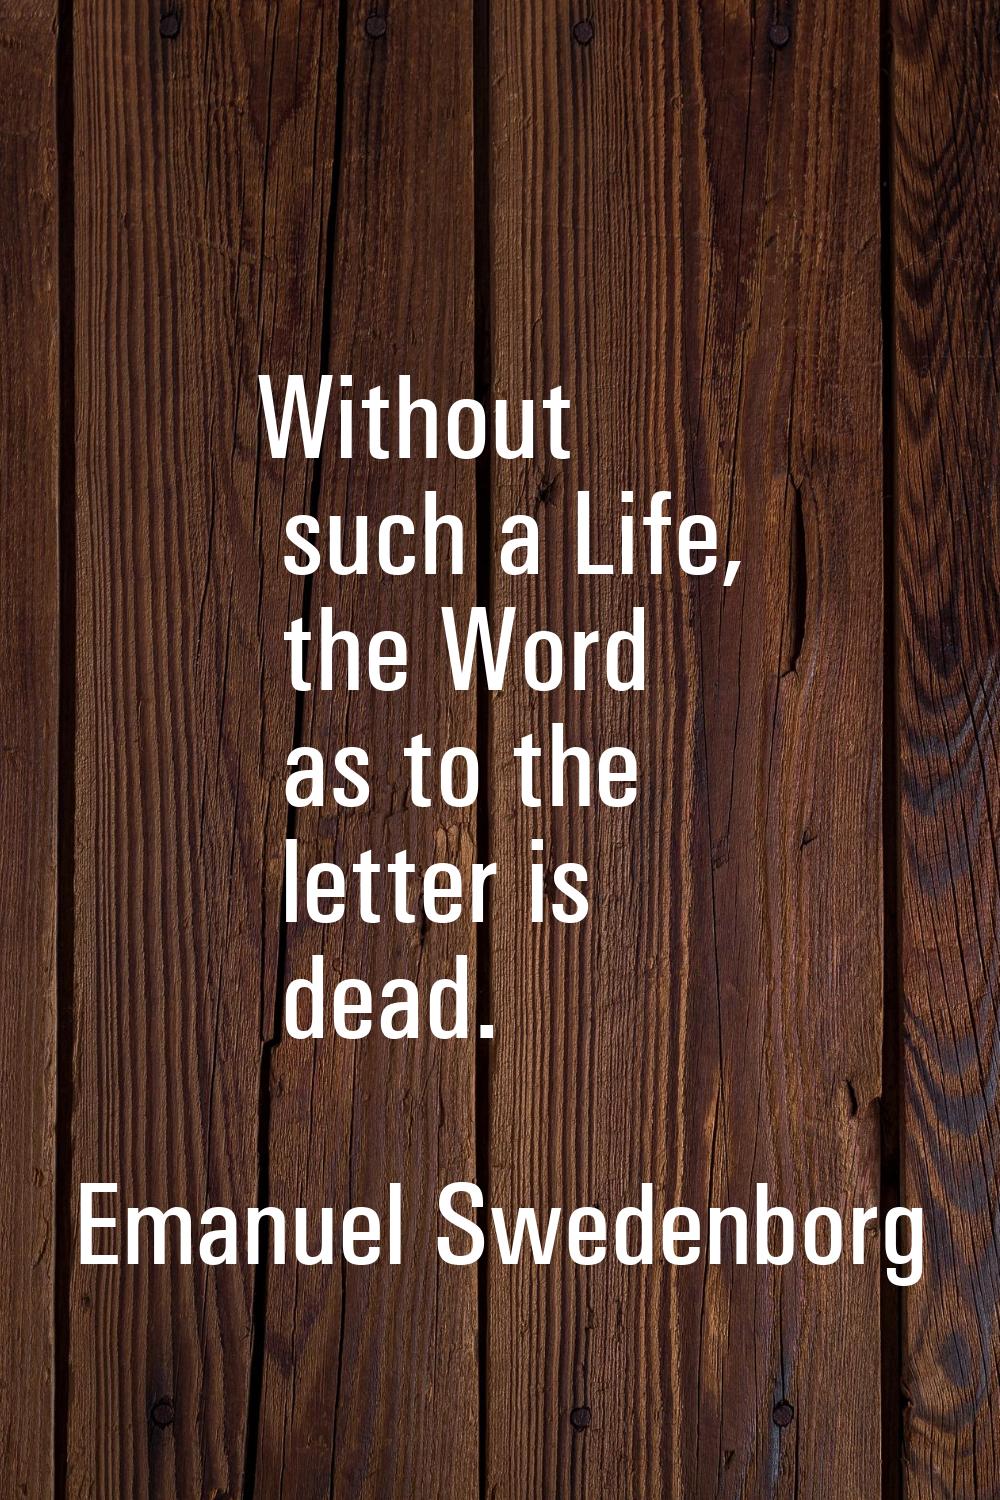 Without such a Life, the Word as to the letter is dead.